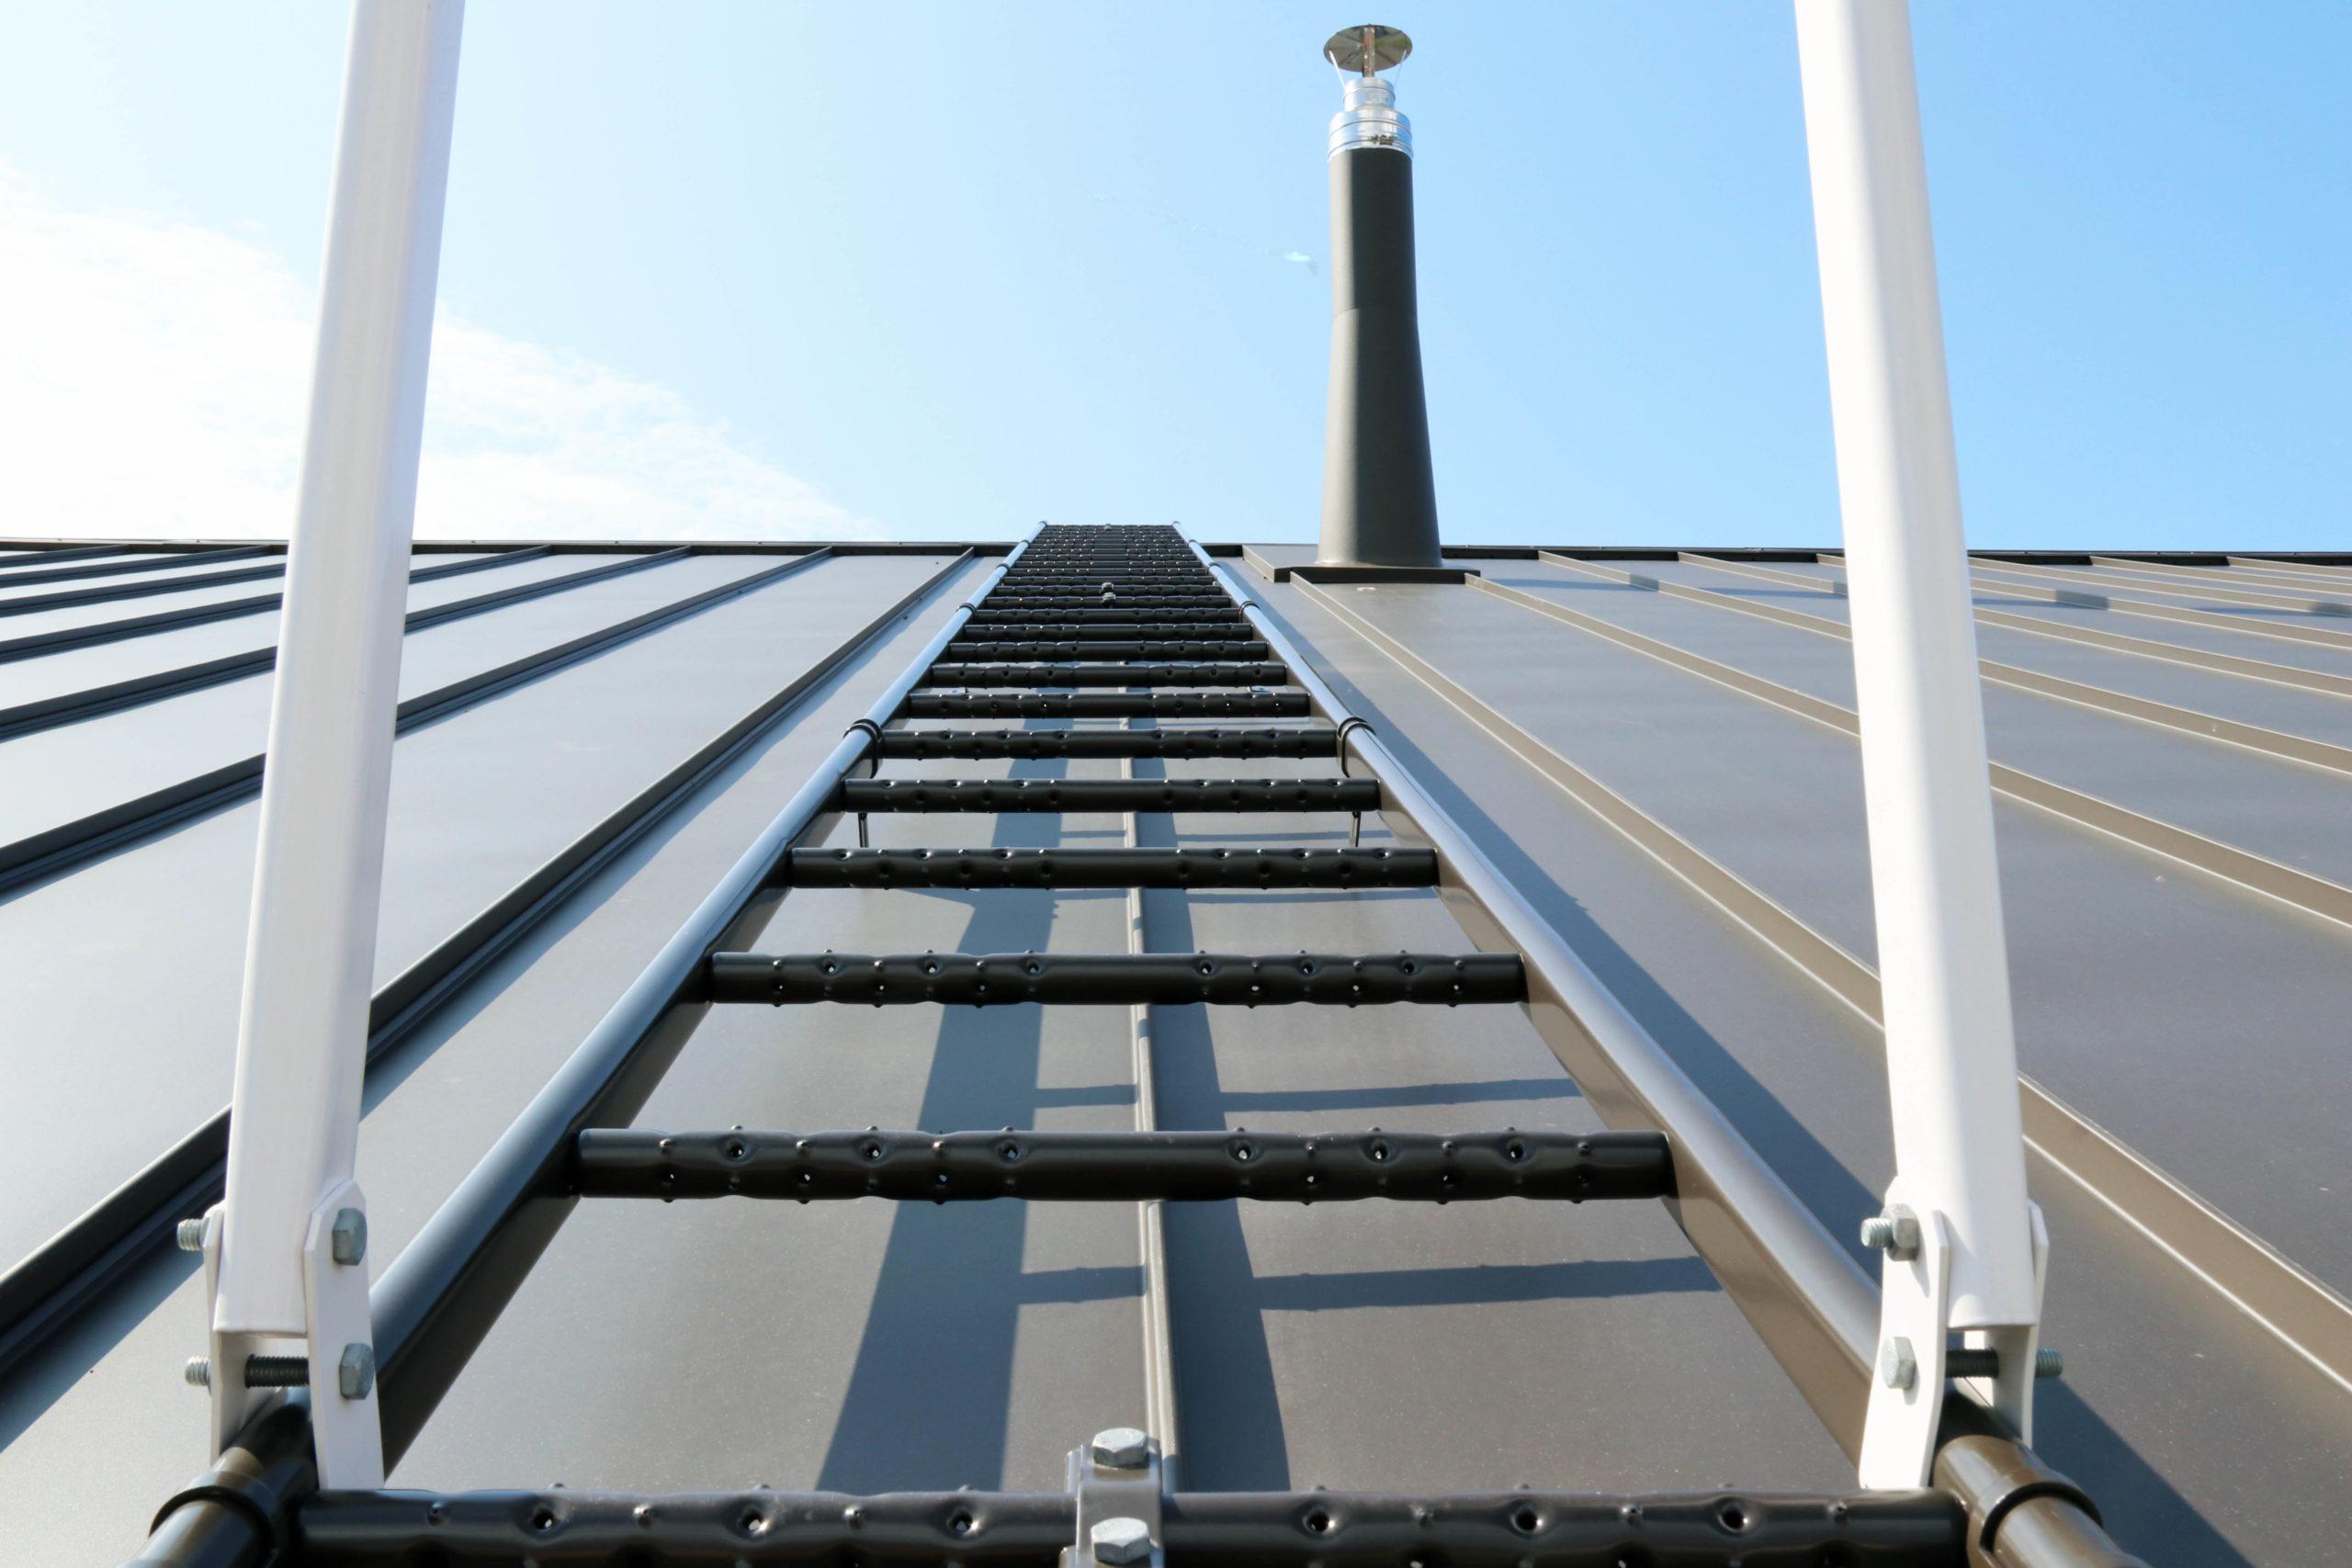 Pisko roof ladder ensures safe access to the chimney and other objects on the roof that require maintenance.